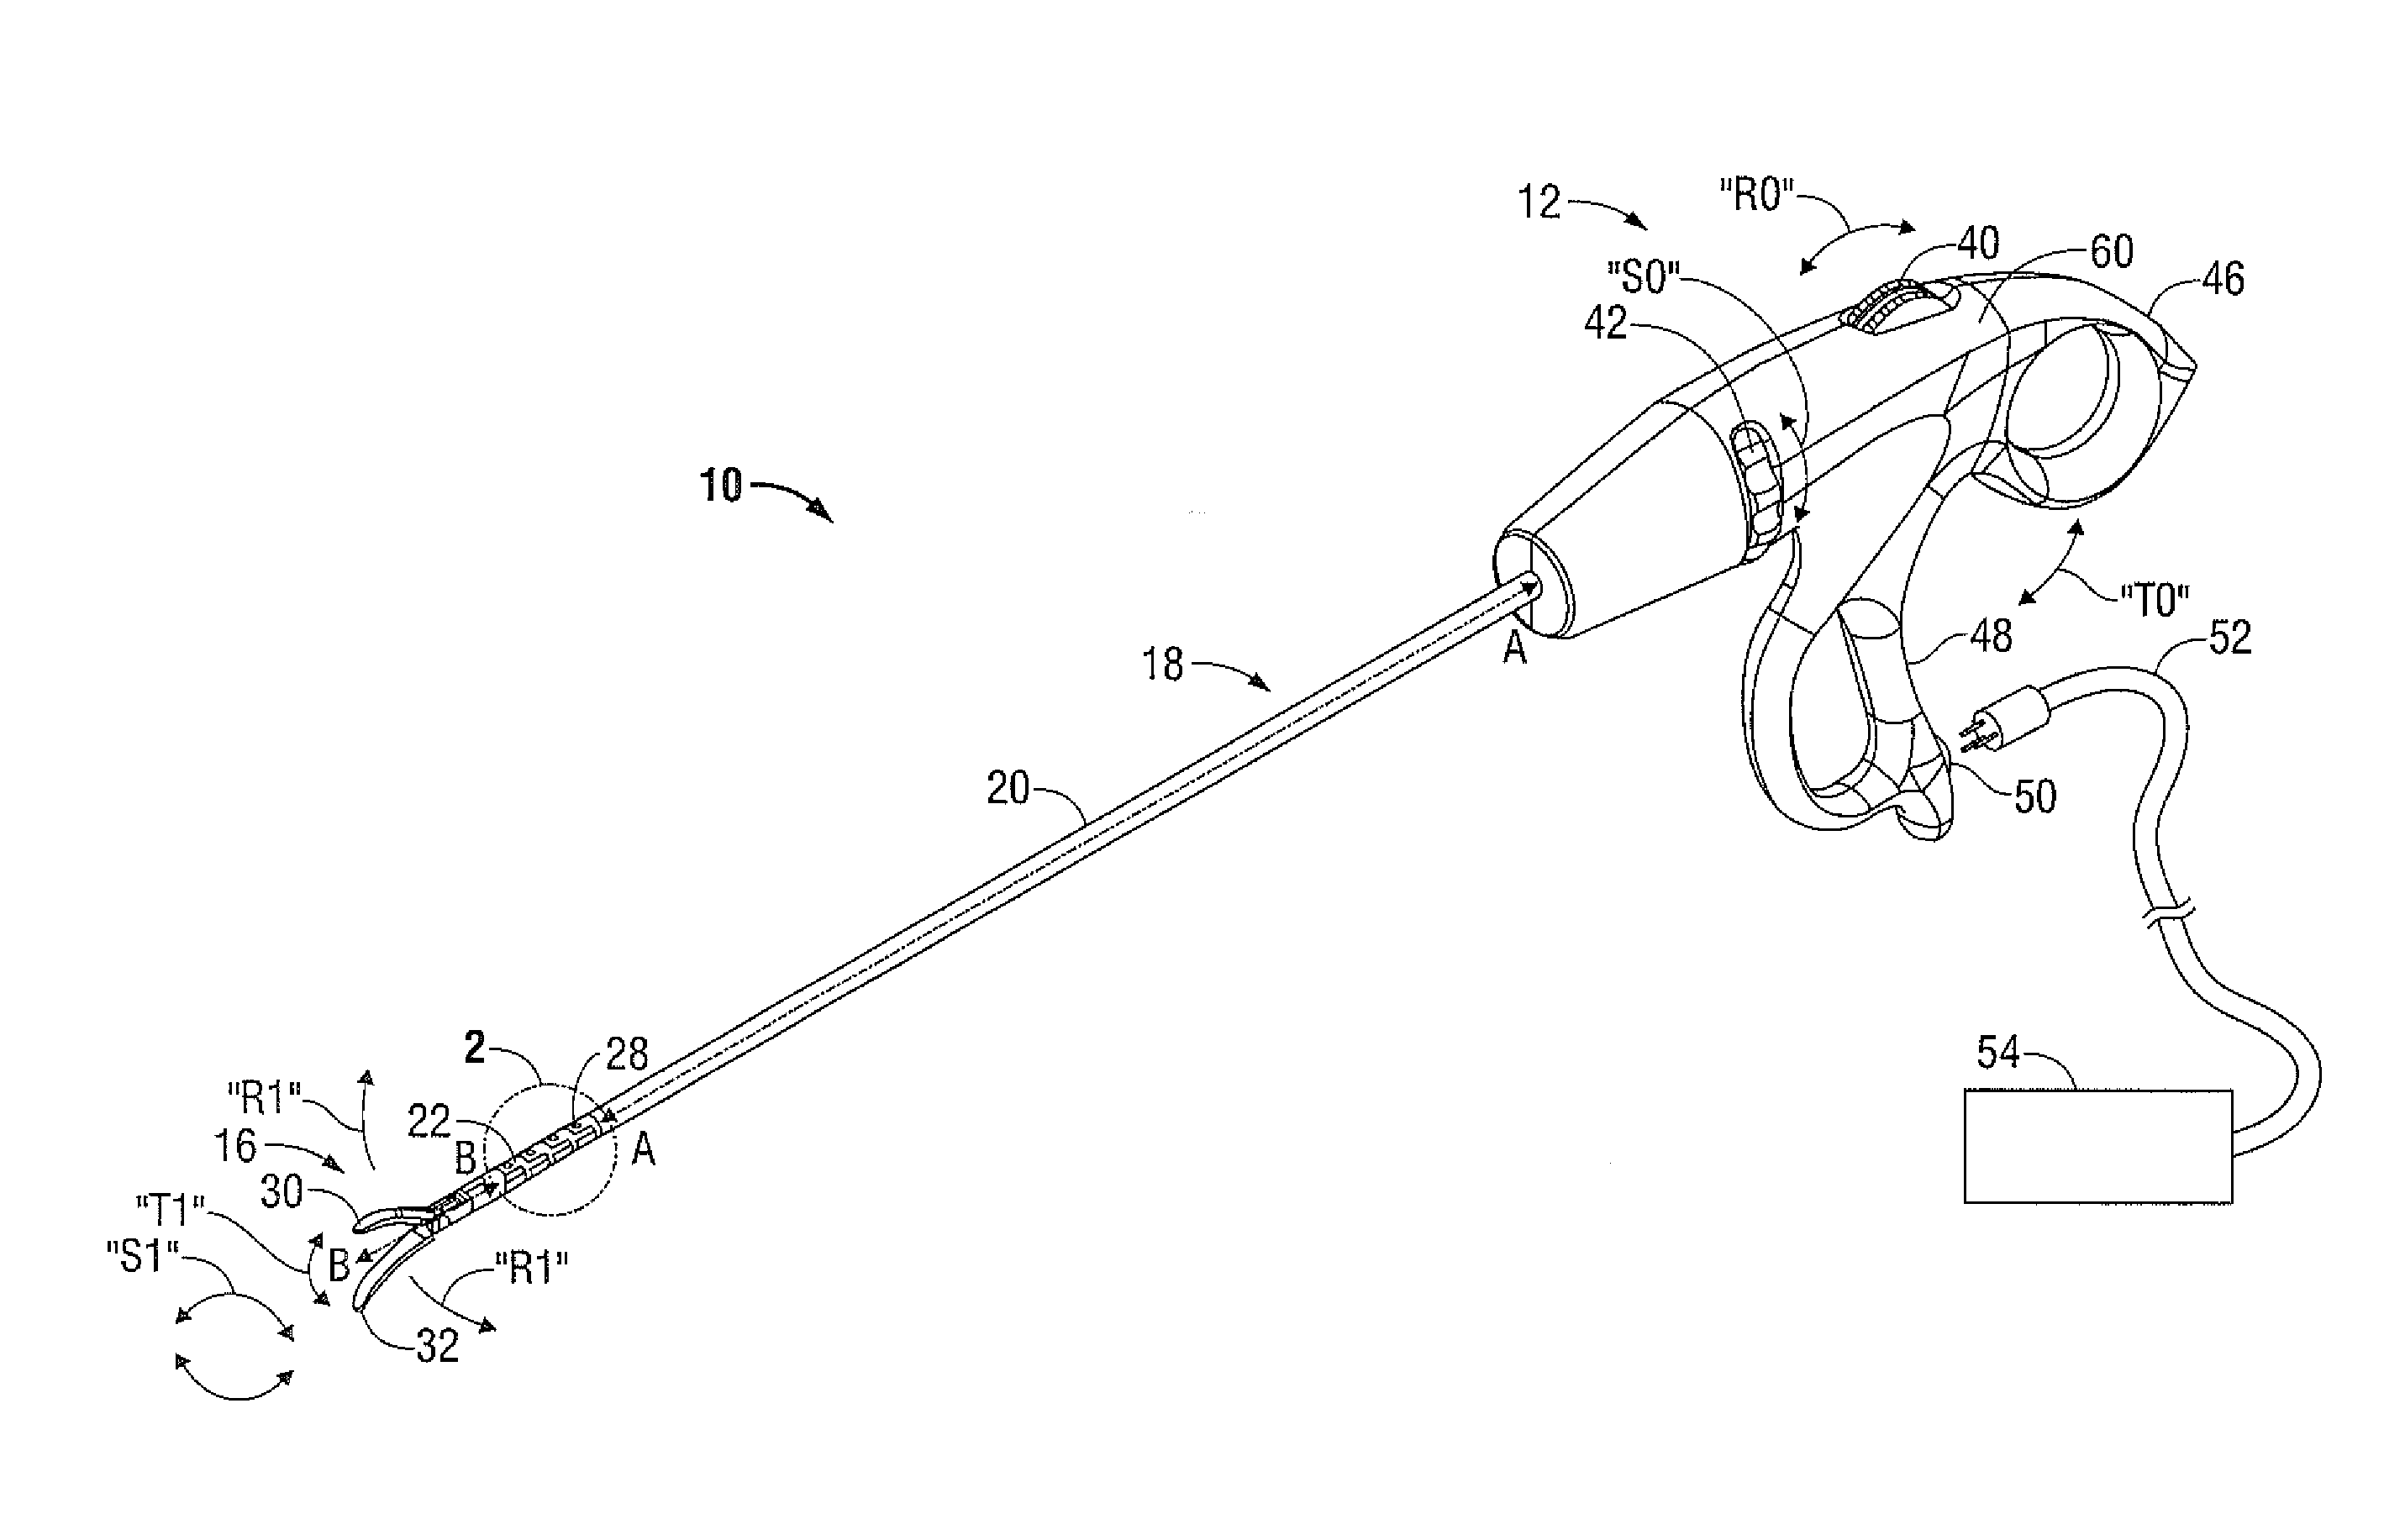 Drive Mechanism for Articulation of a Surgical Instrument